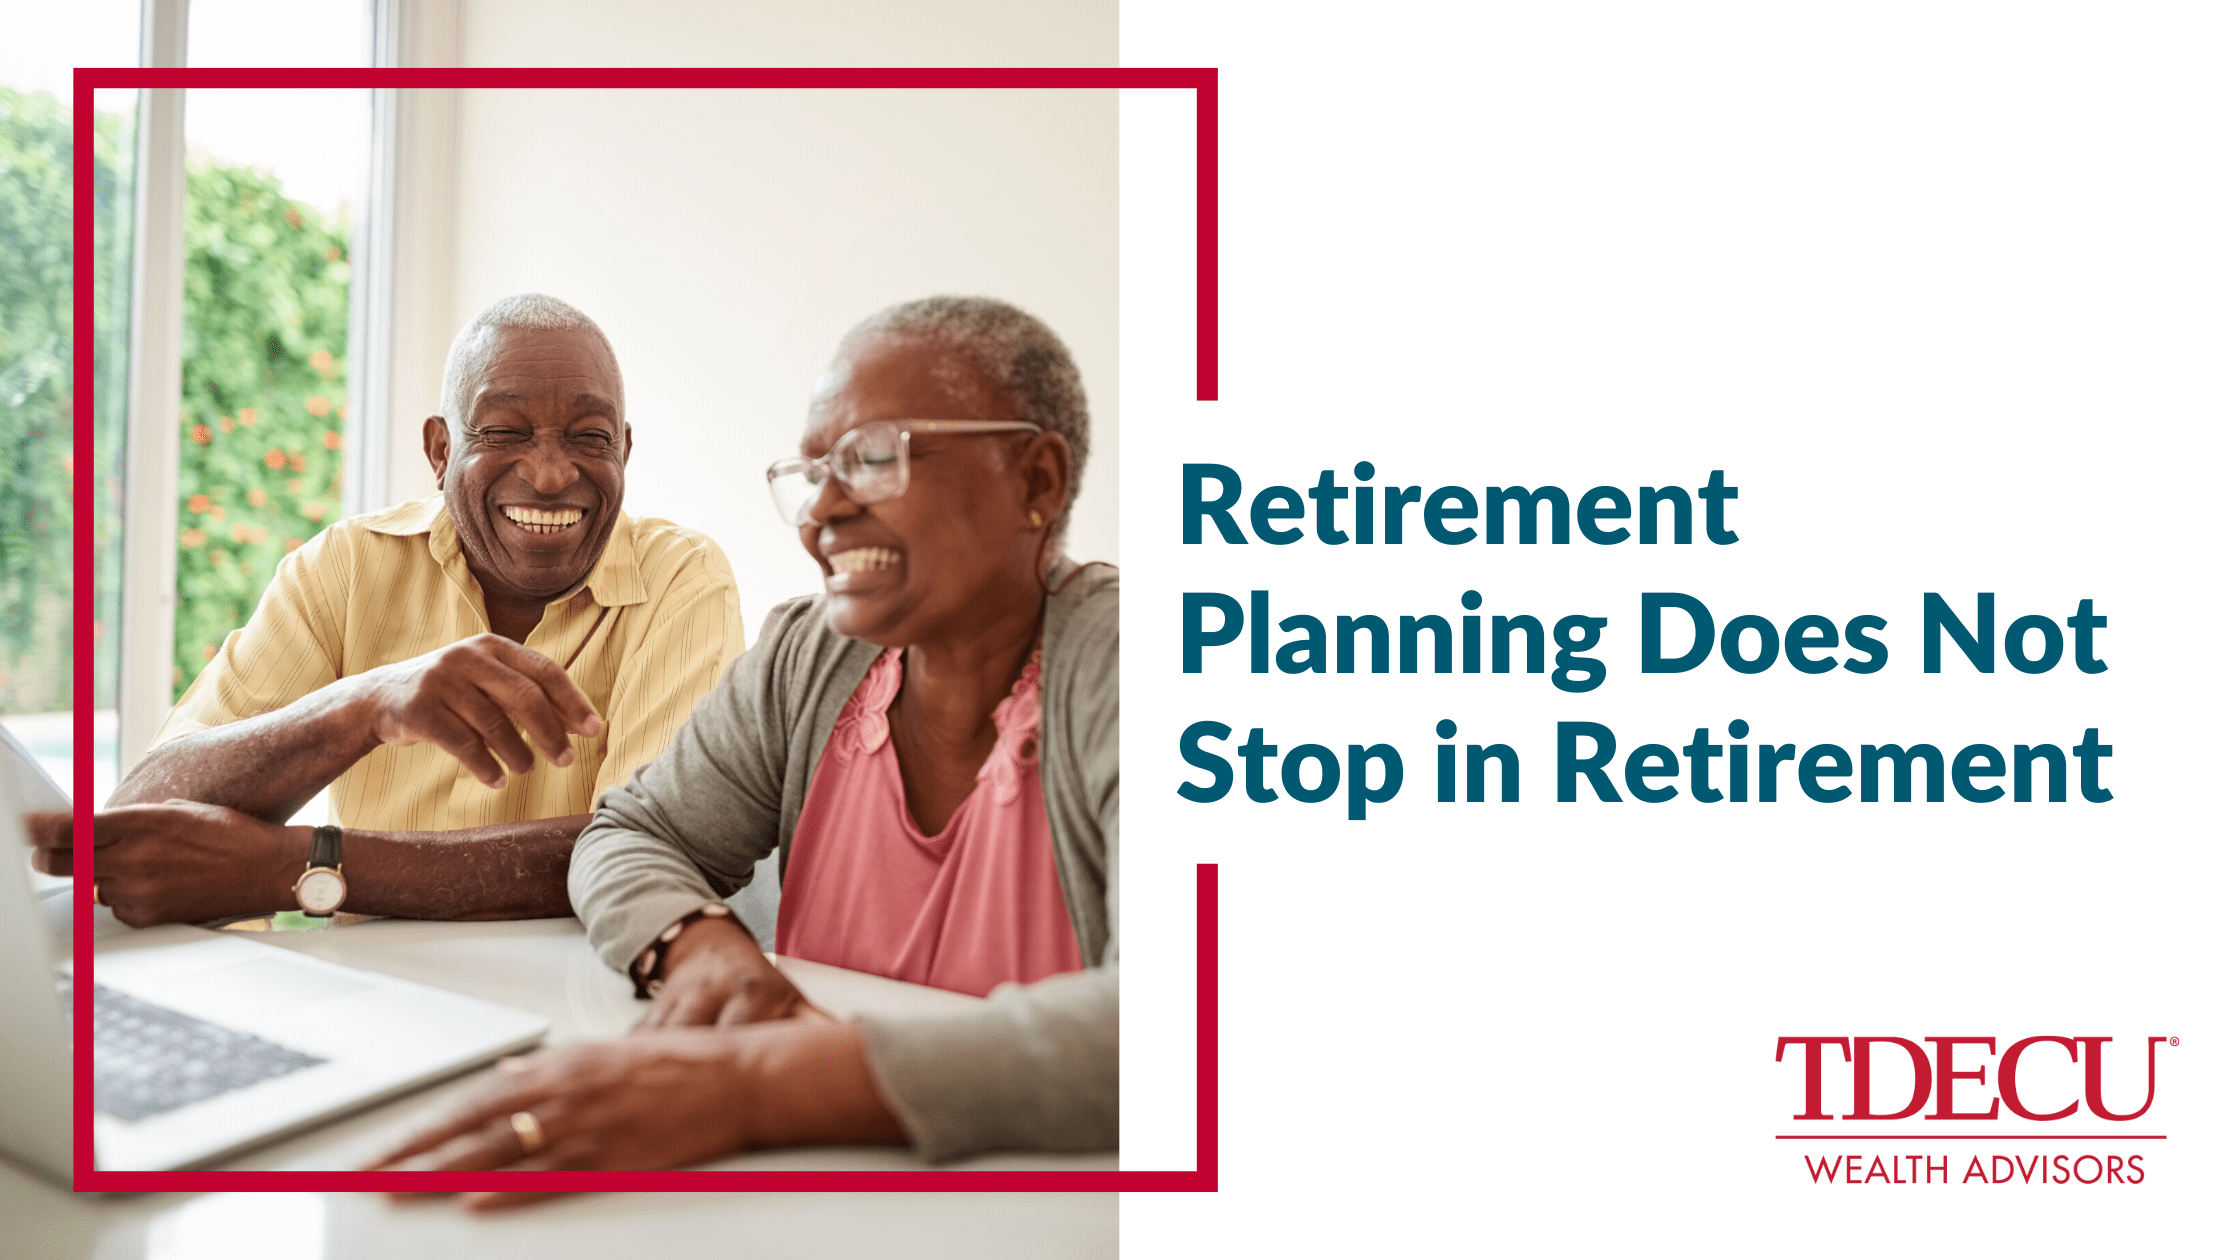 Retirement Planning Does Not Stop in Retirement